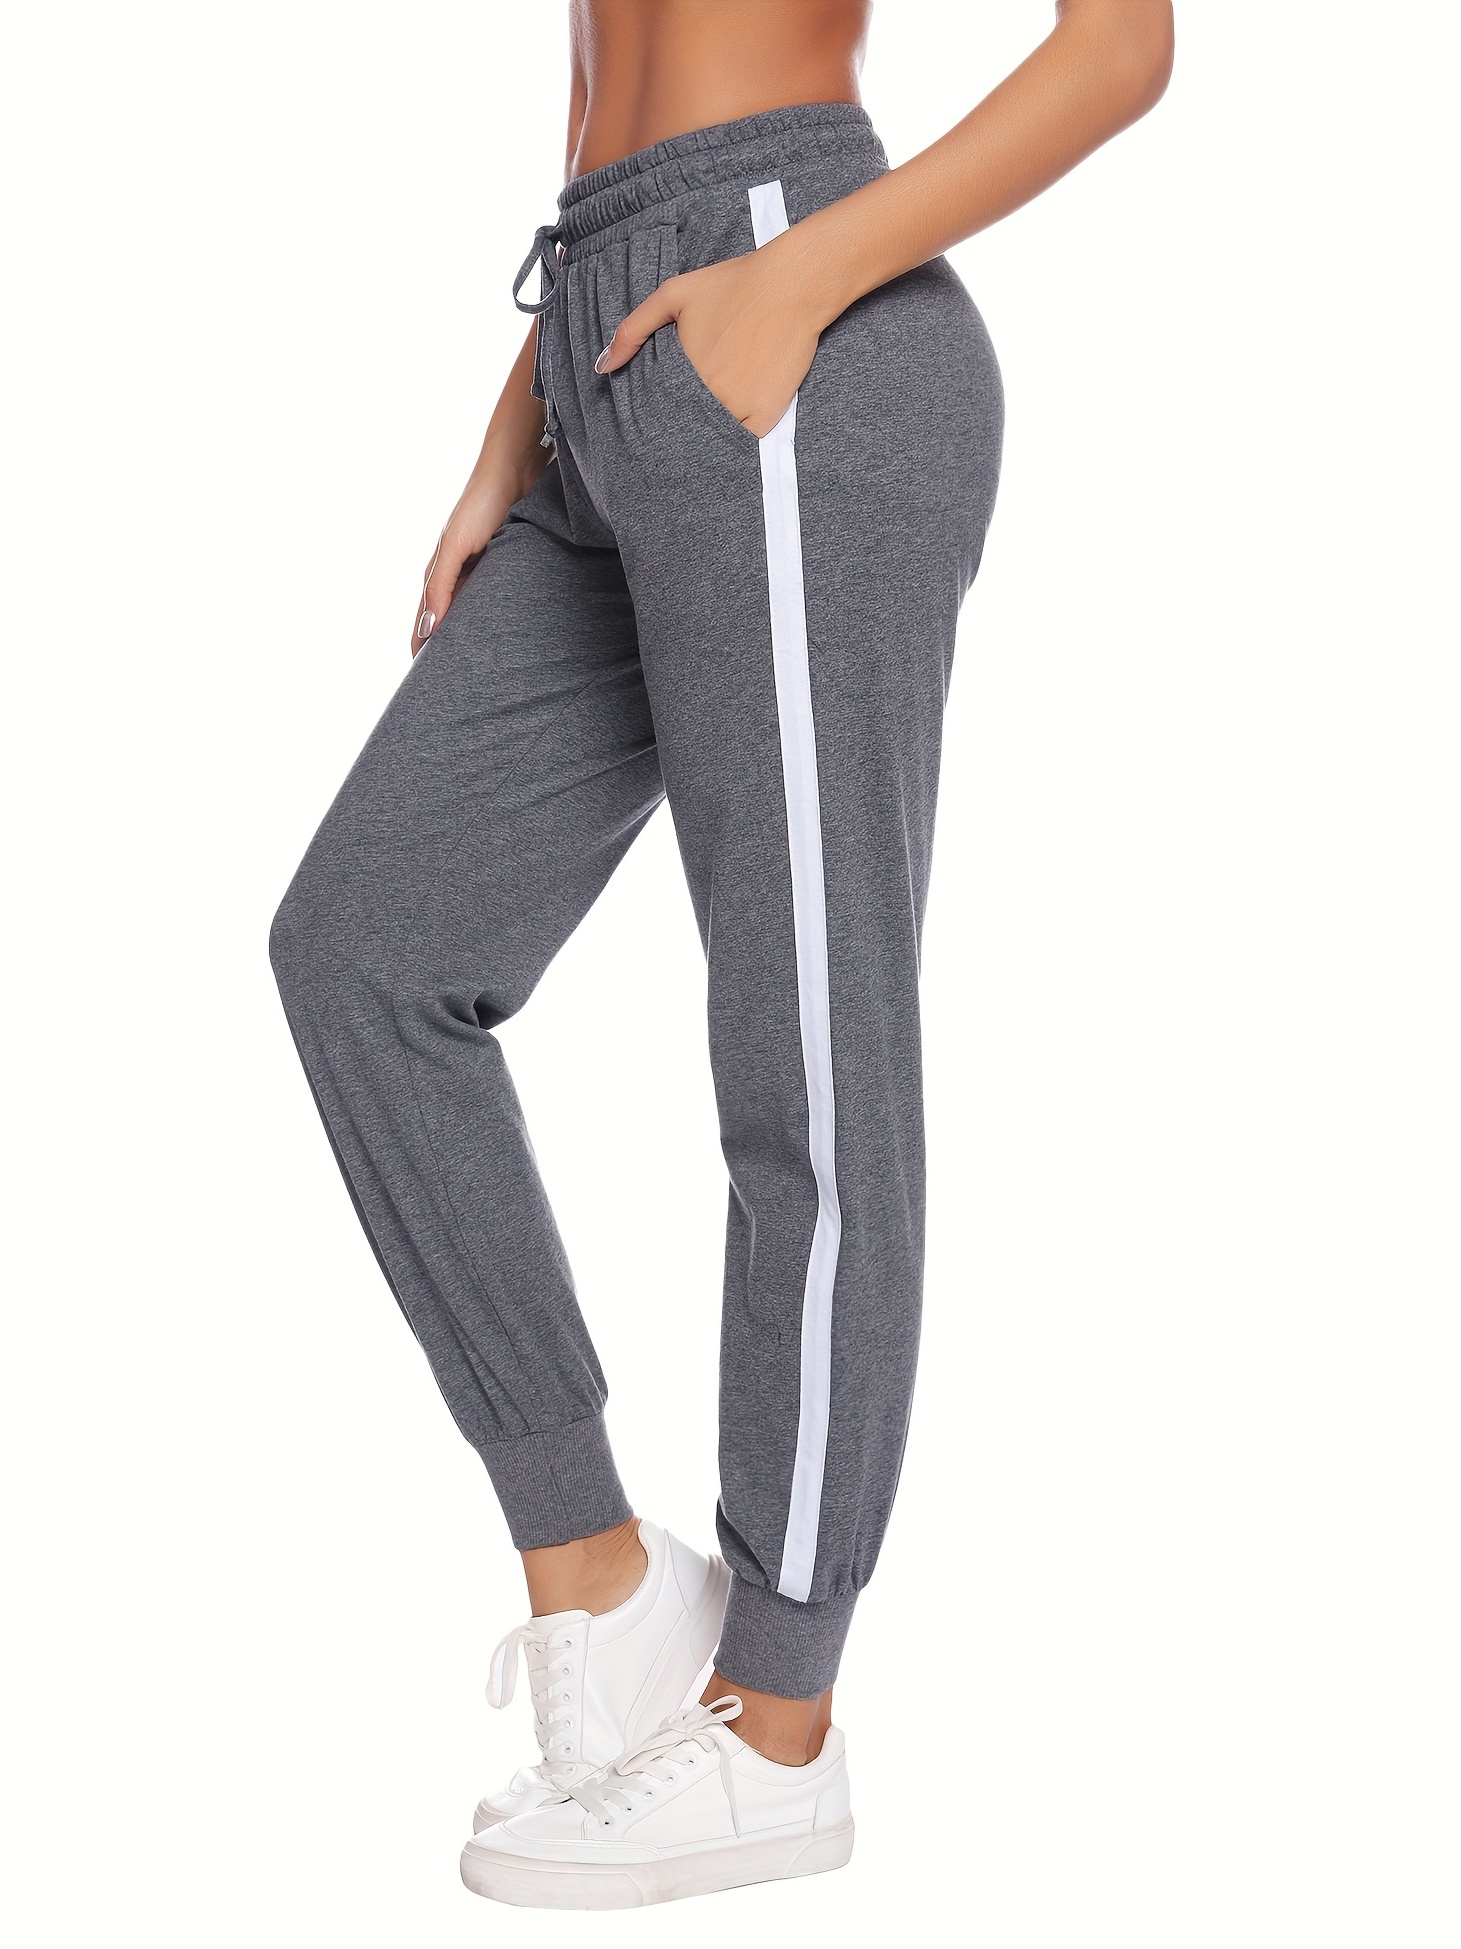 Elastic Waist Sweatpants for Women Drawstring Comfy Sporty Trousers Cinch  Bottom Solid Color Athletic Sweat Pants